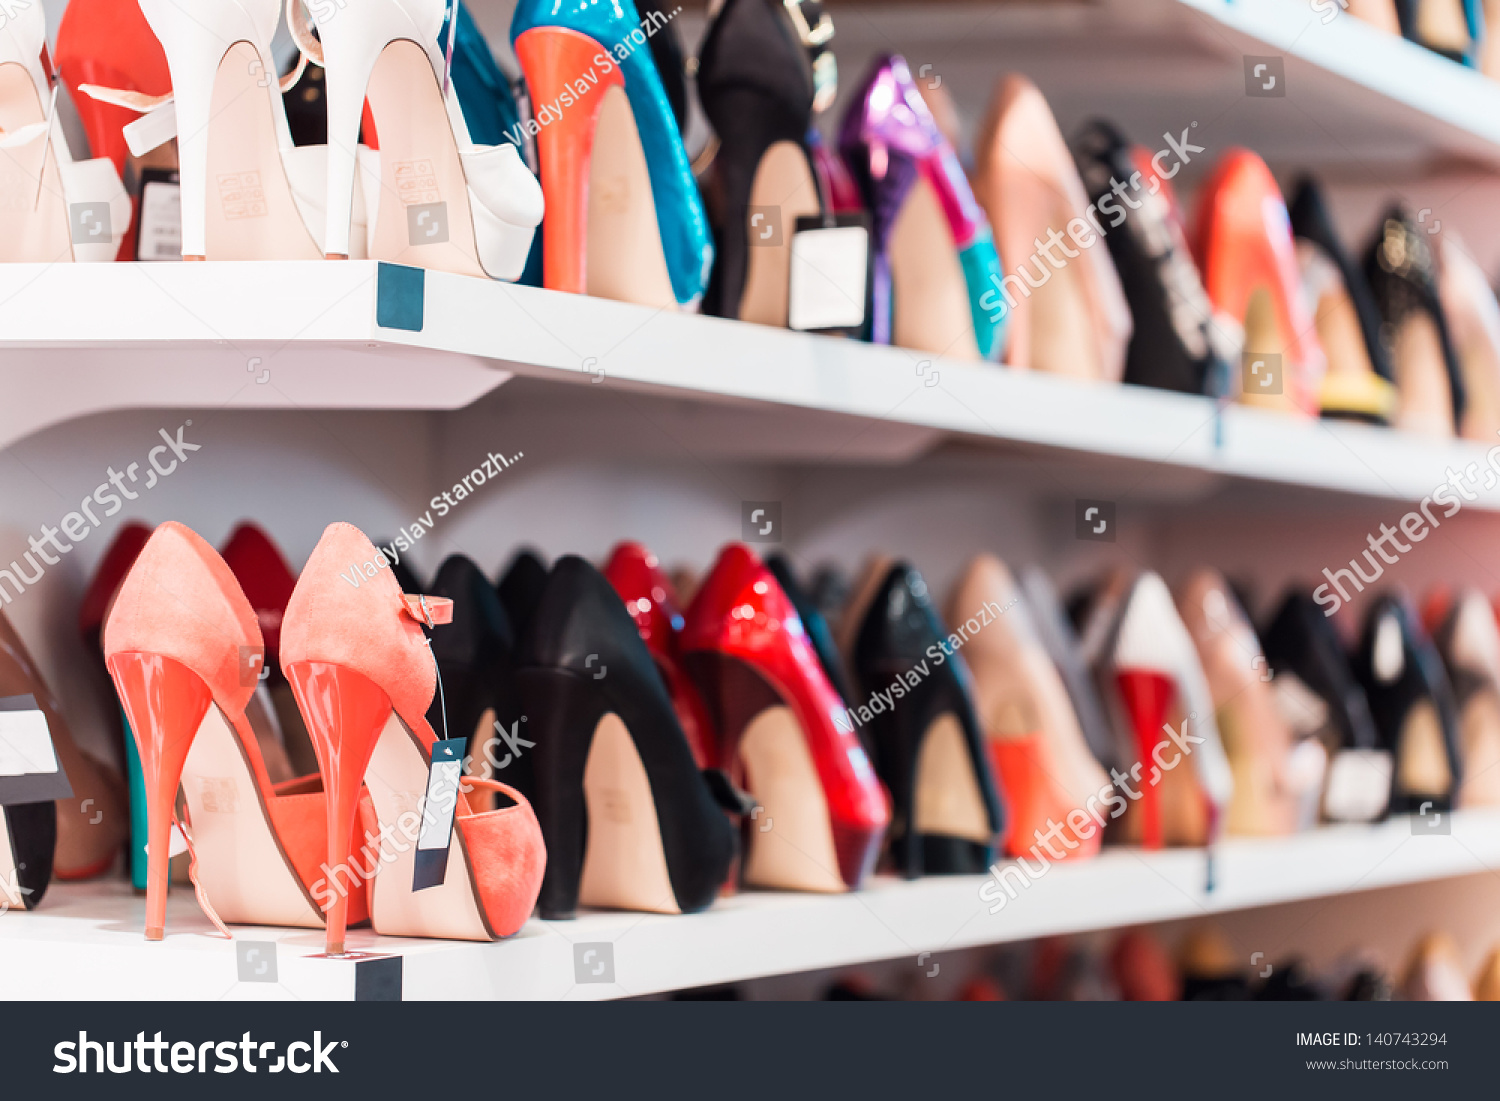 Background With Shoes On Shelves Of Shop Stock Photo 140743294 ...